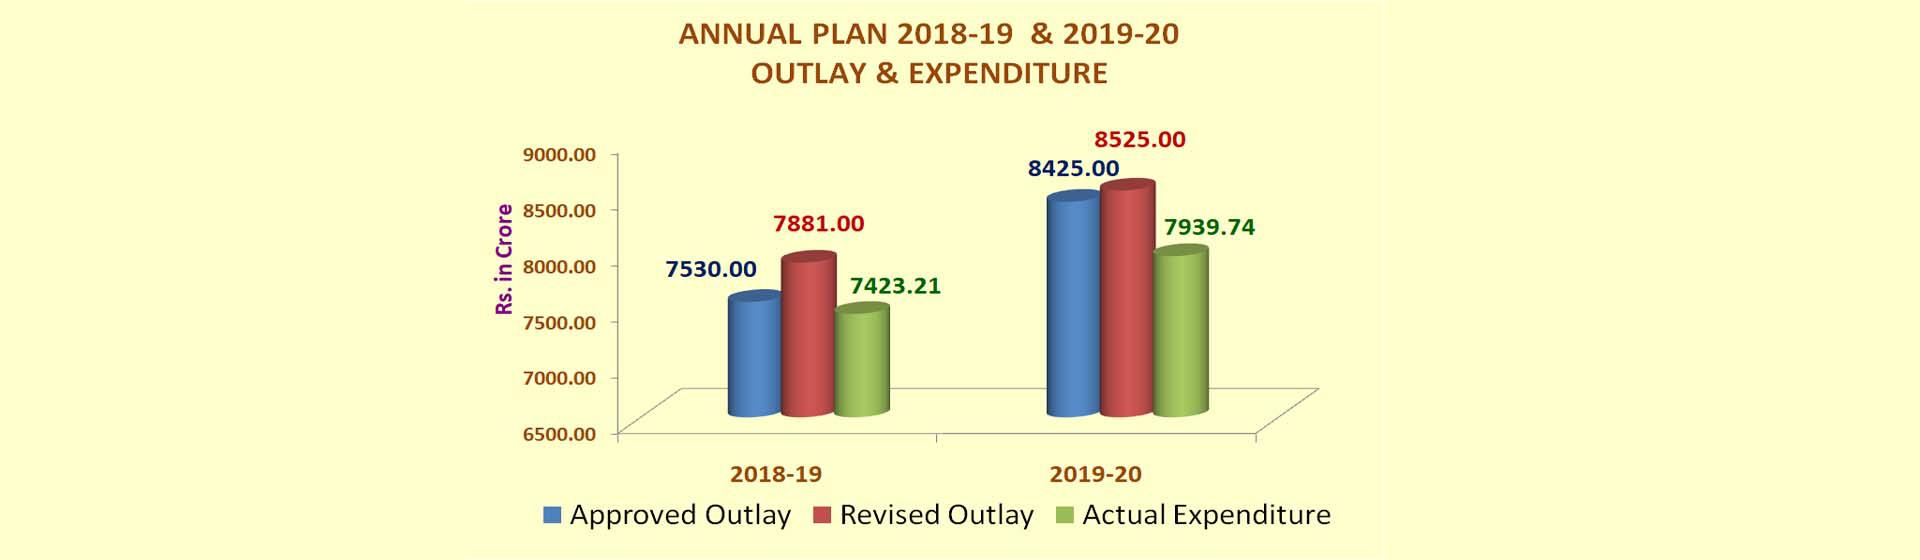 Image of Annual Plan 2018-2019 & 2019-2020